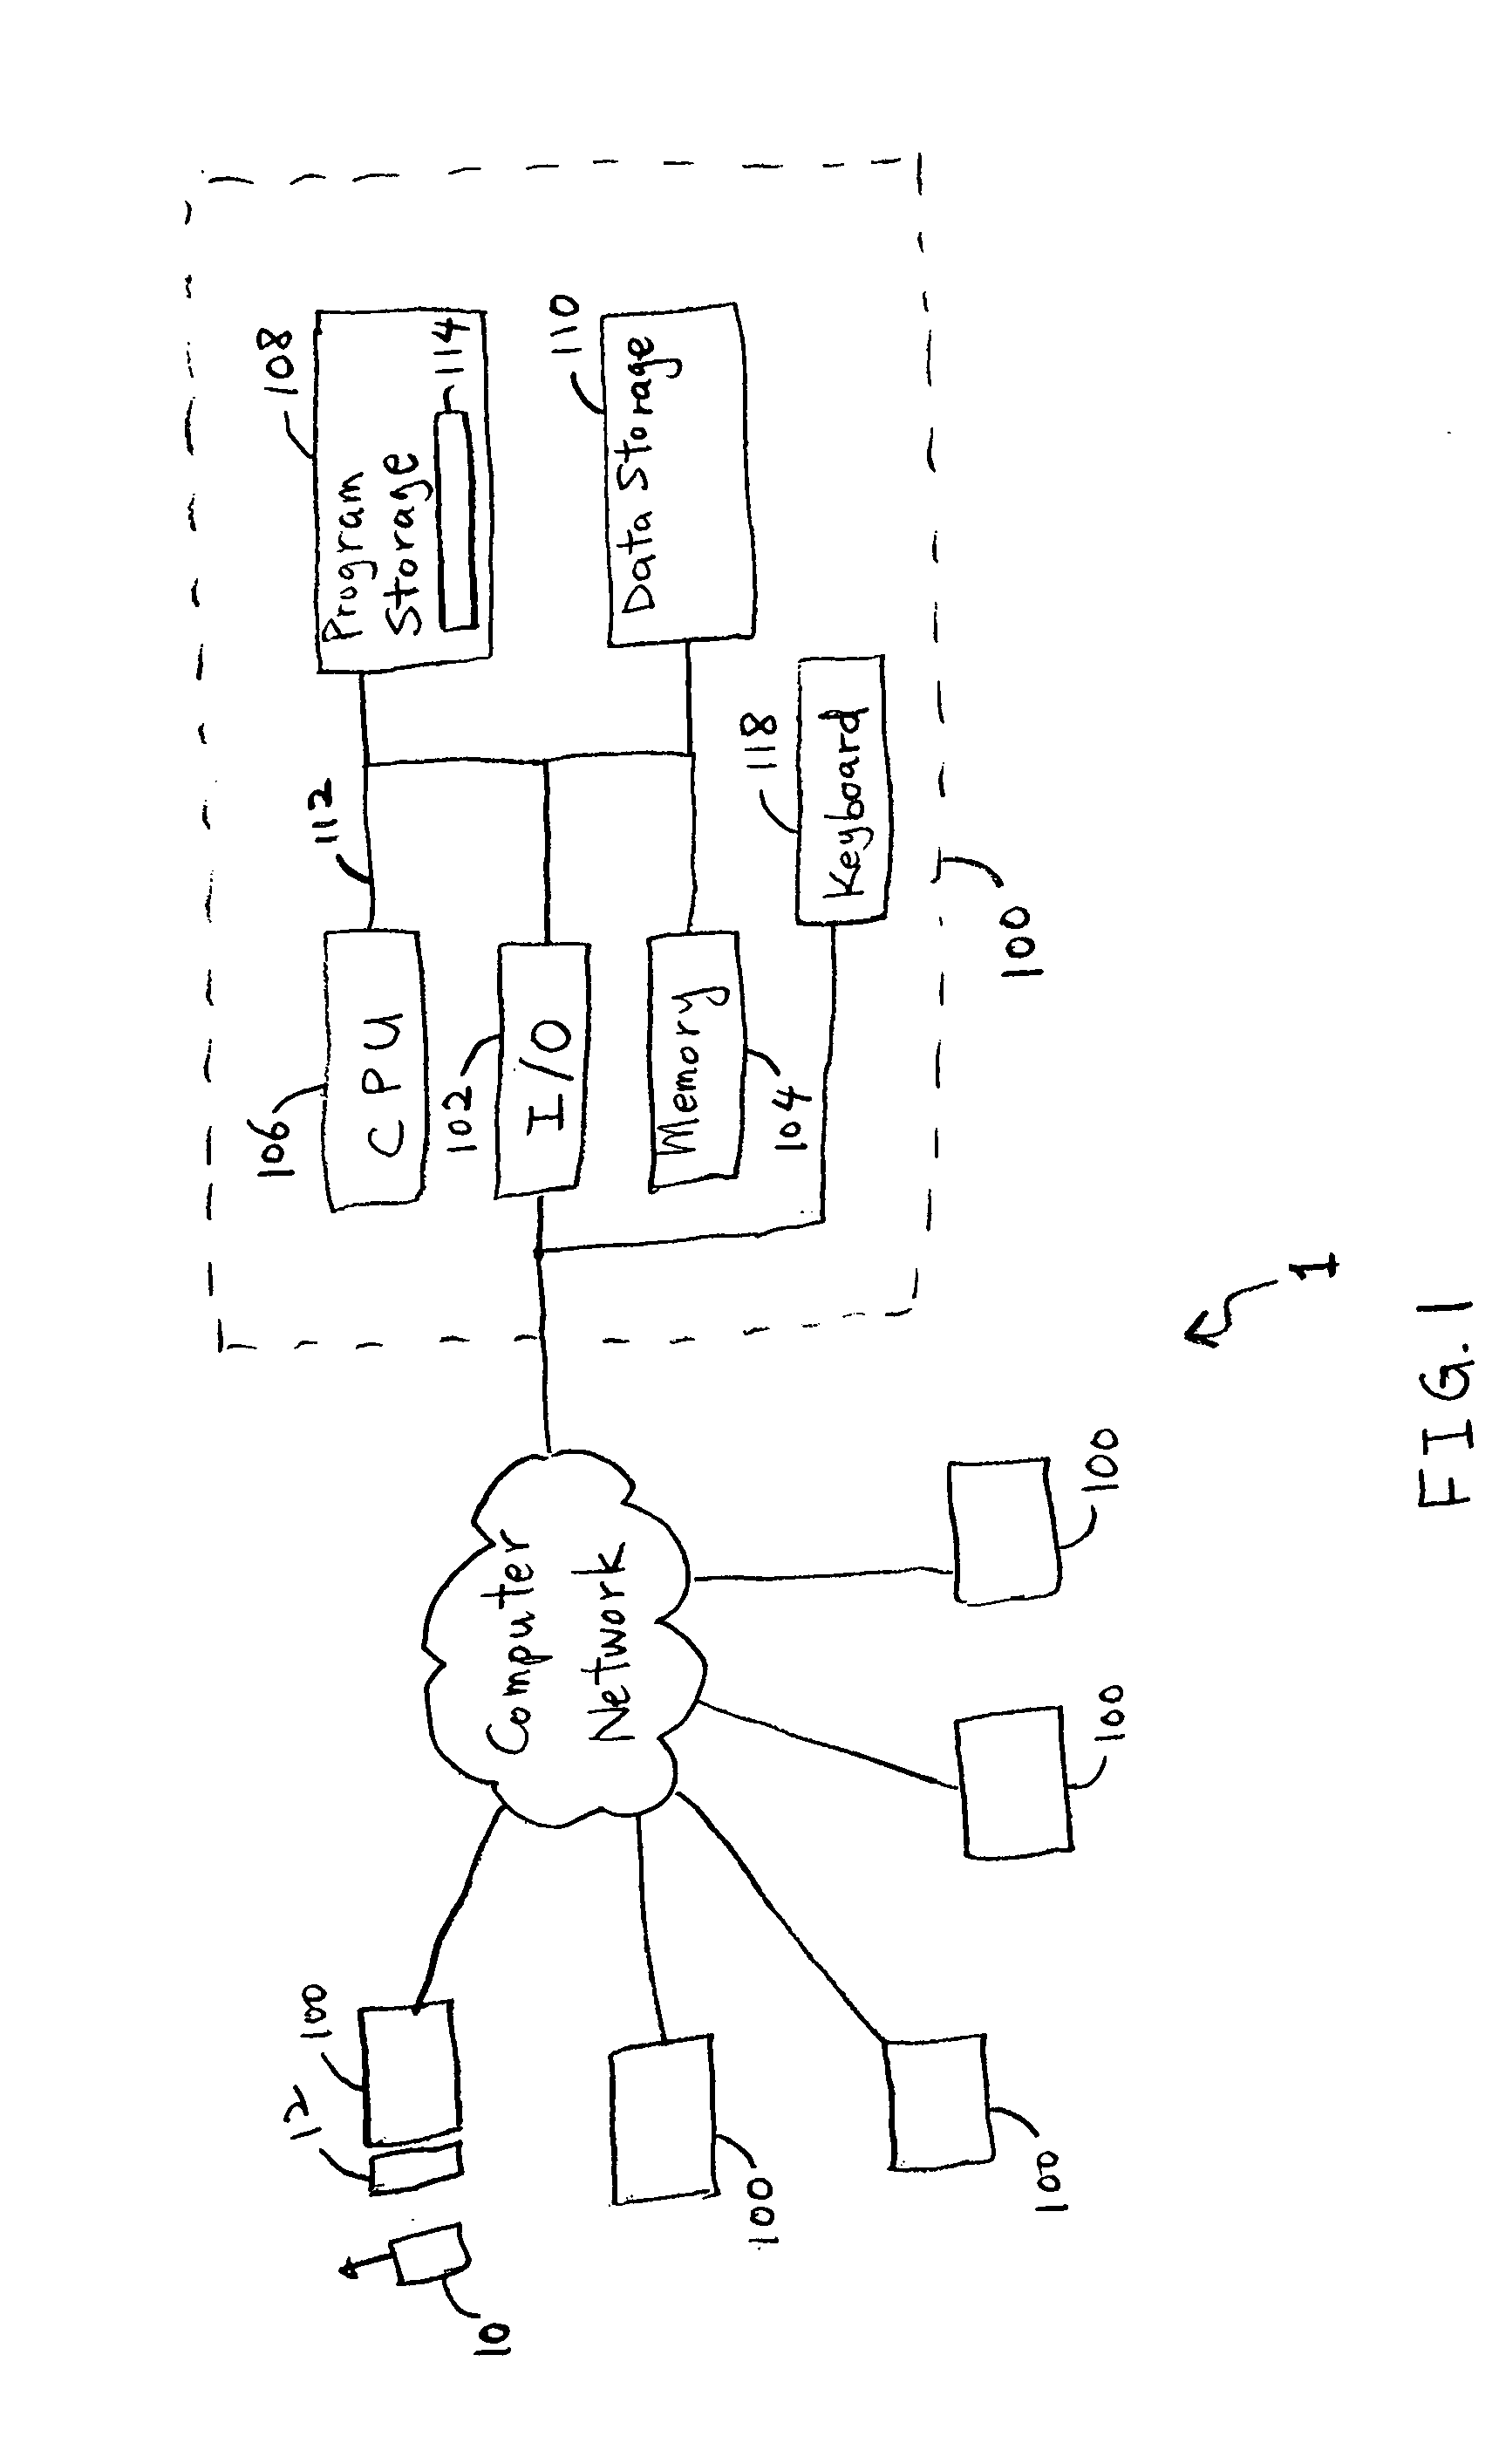 System and method of facilitating contactless payment transactions across different payment systems using a common mobile device acting as a stored value device